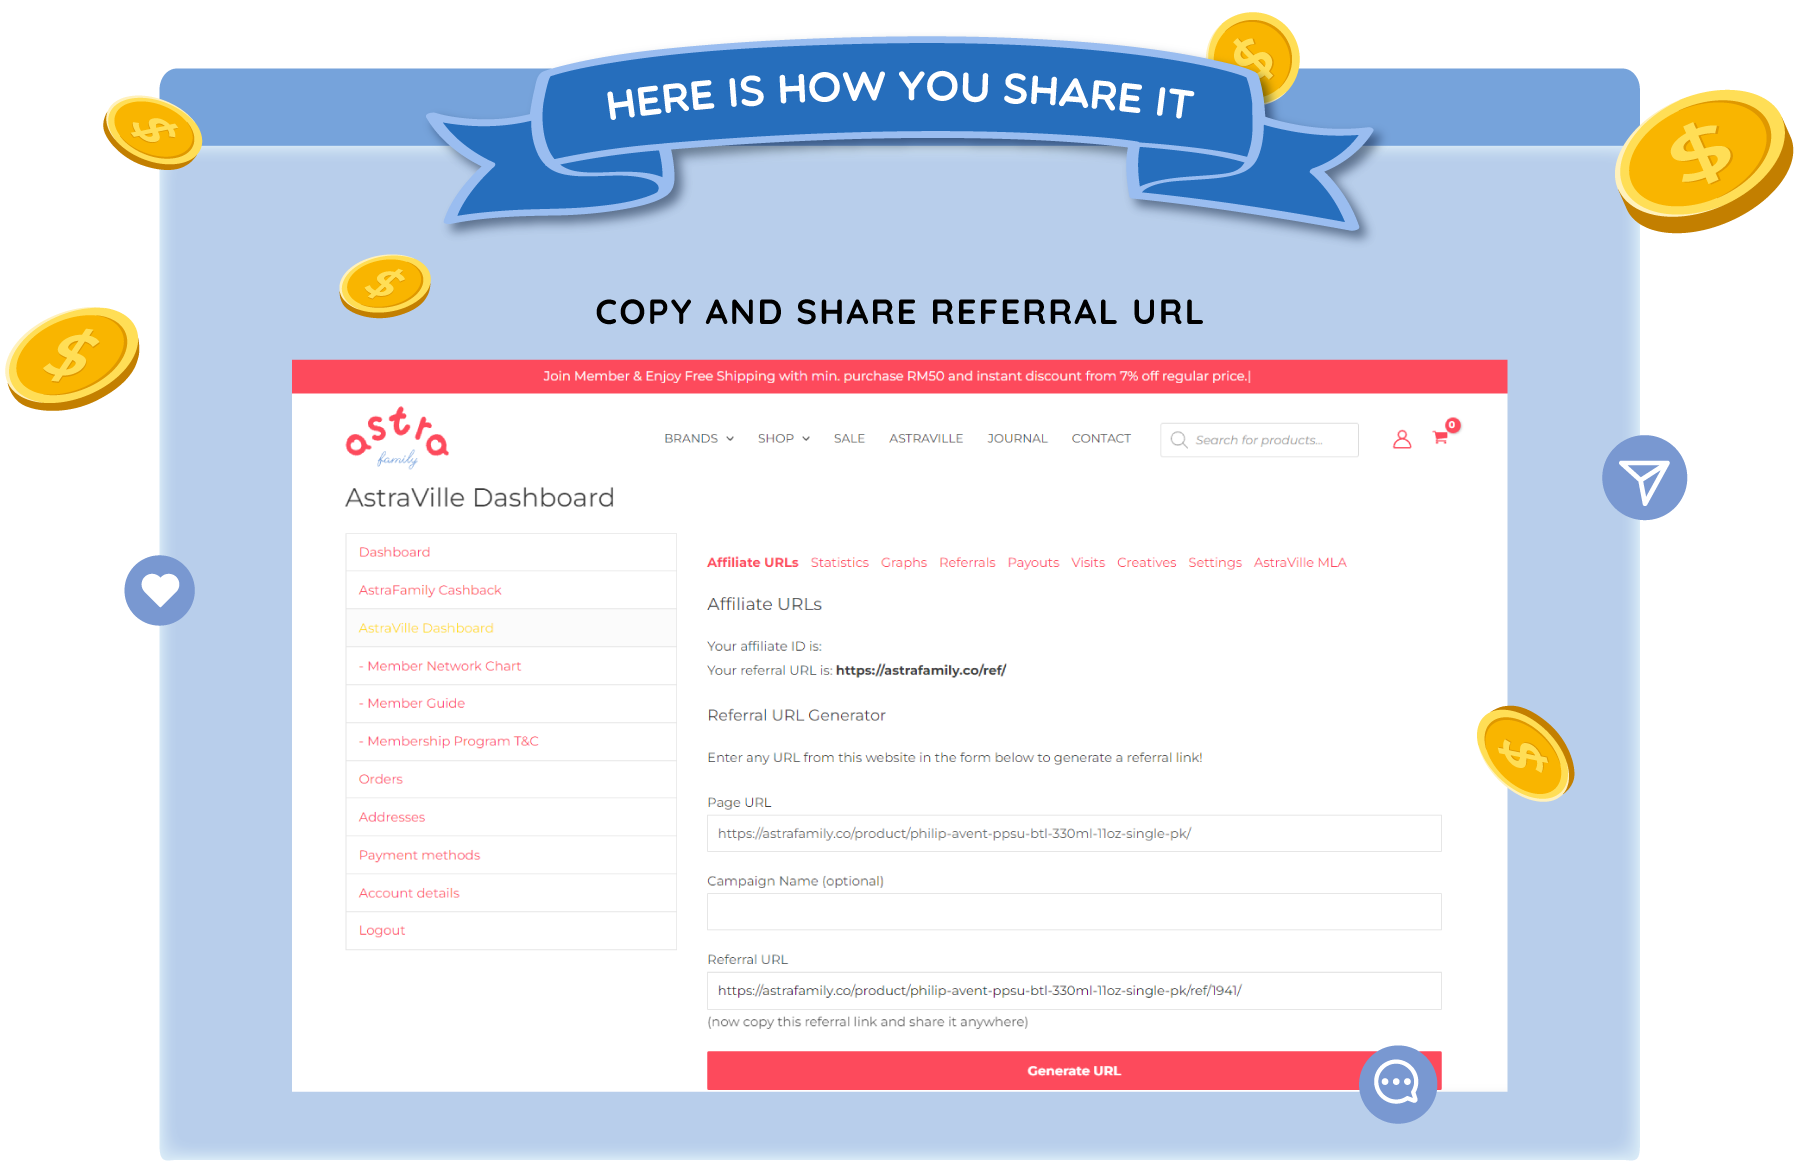 Astra Family Copy and earn by sharing referral url